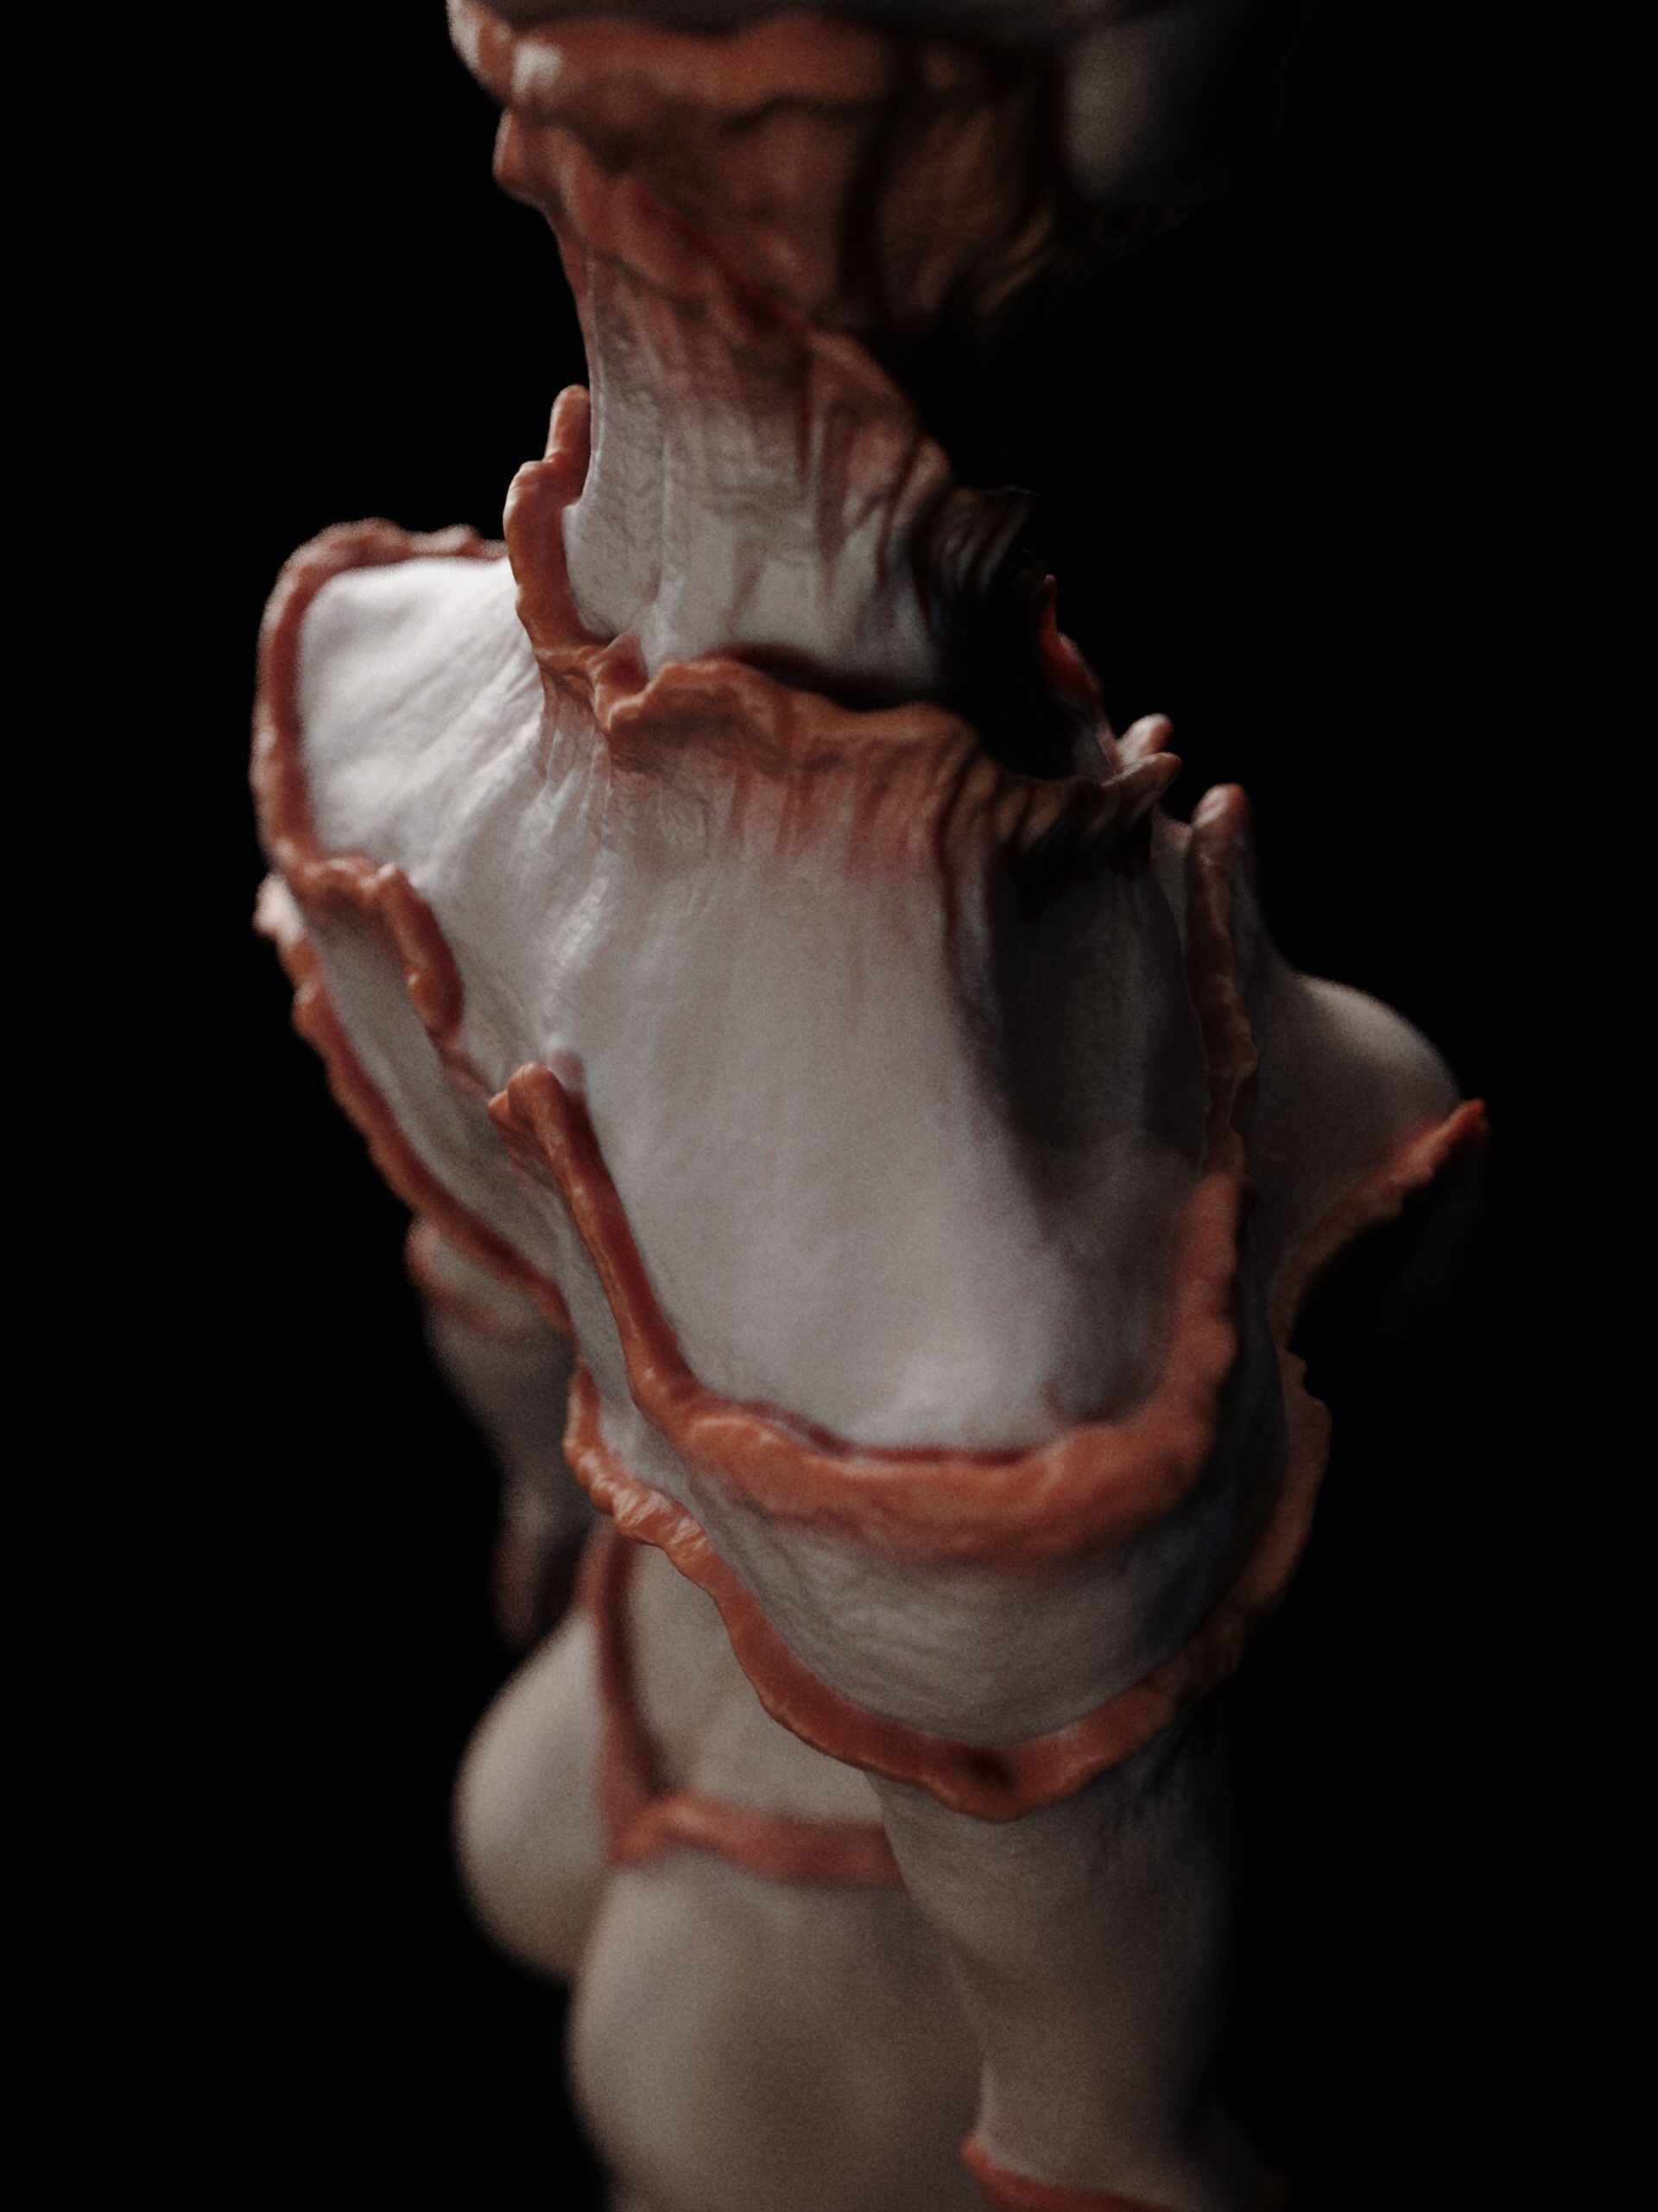 Concept design of humanoid creature, female anatomy exercise and skin texturing.